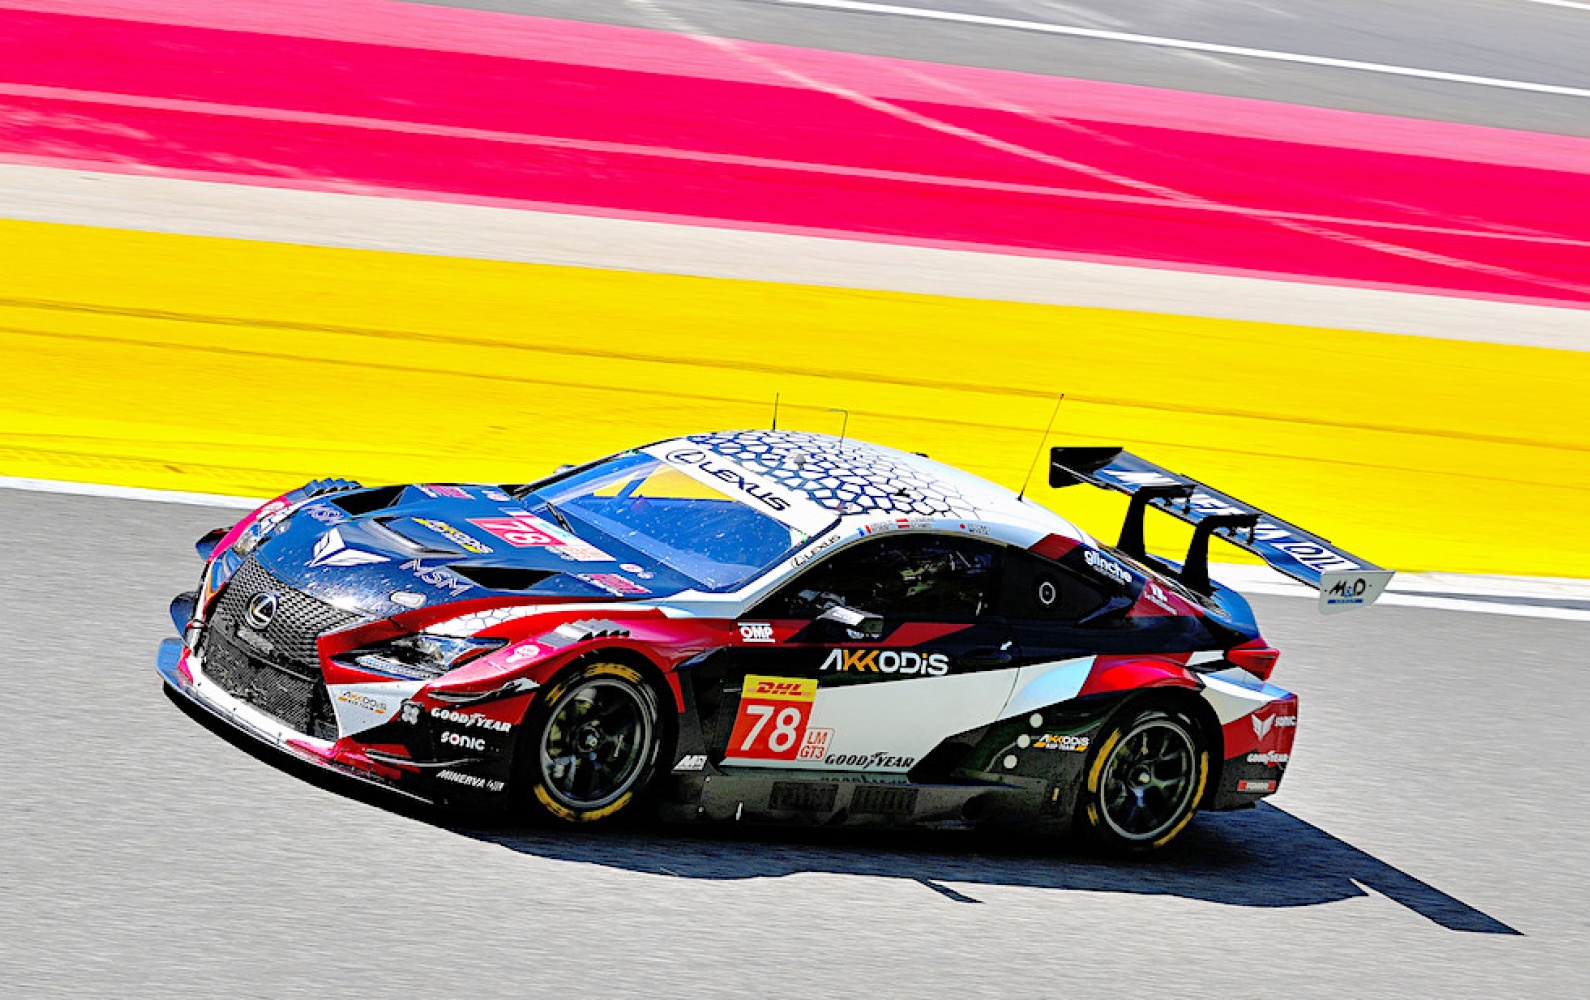 FIA WEC - 6 Hours of Spa - Akkodis ASP Team in the points!